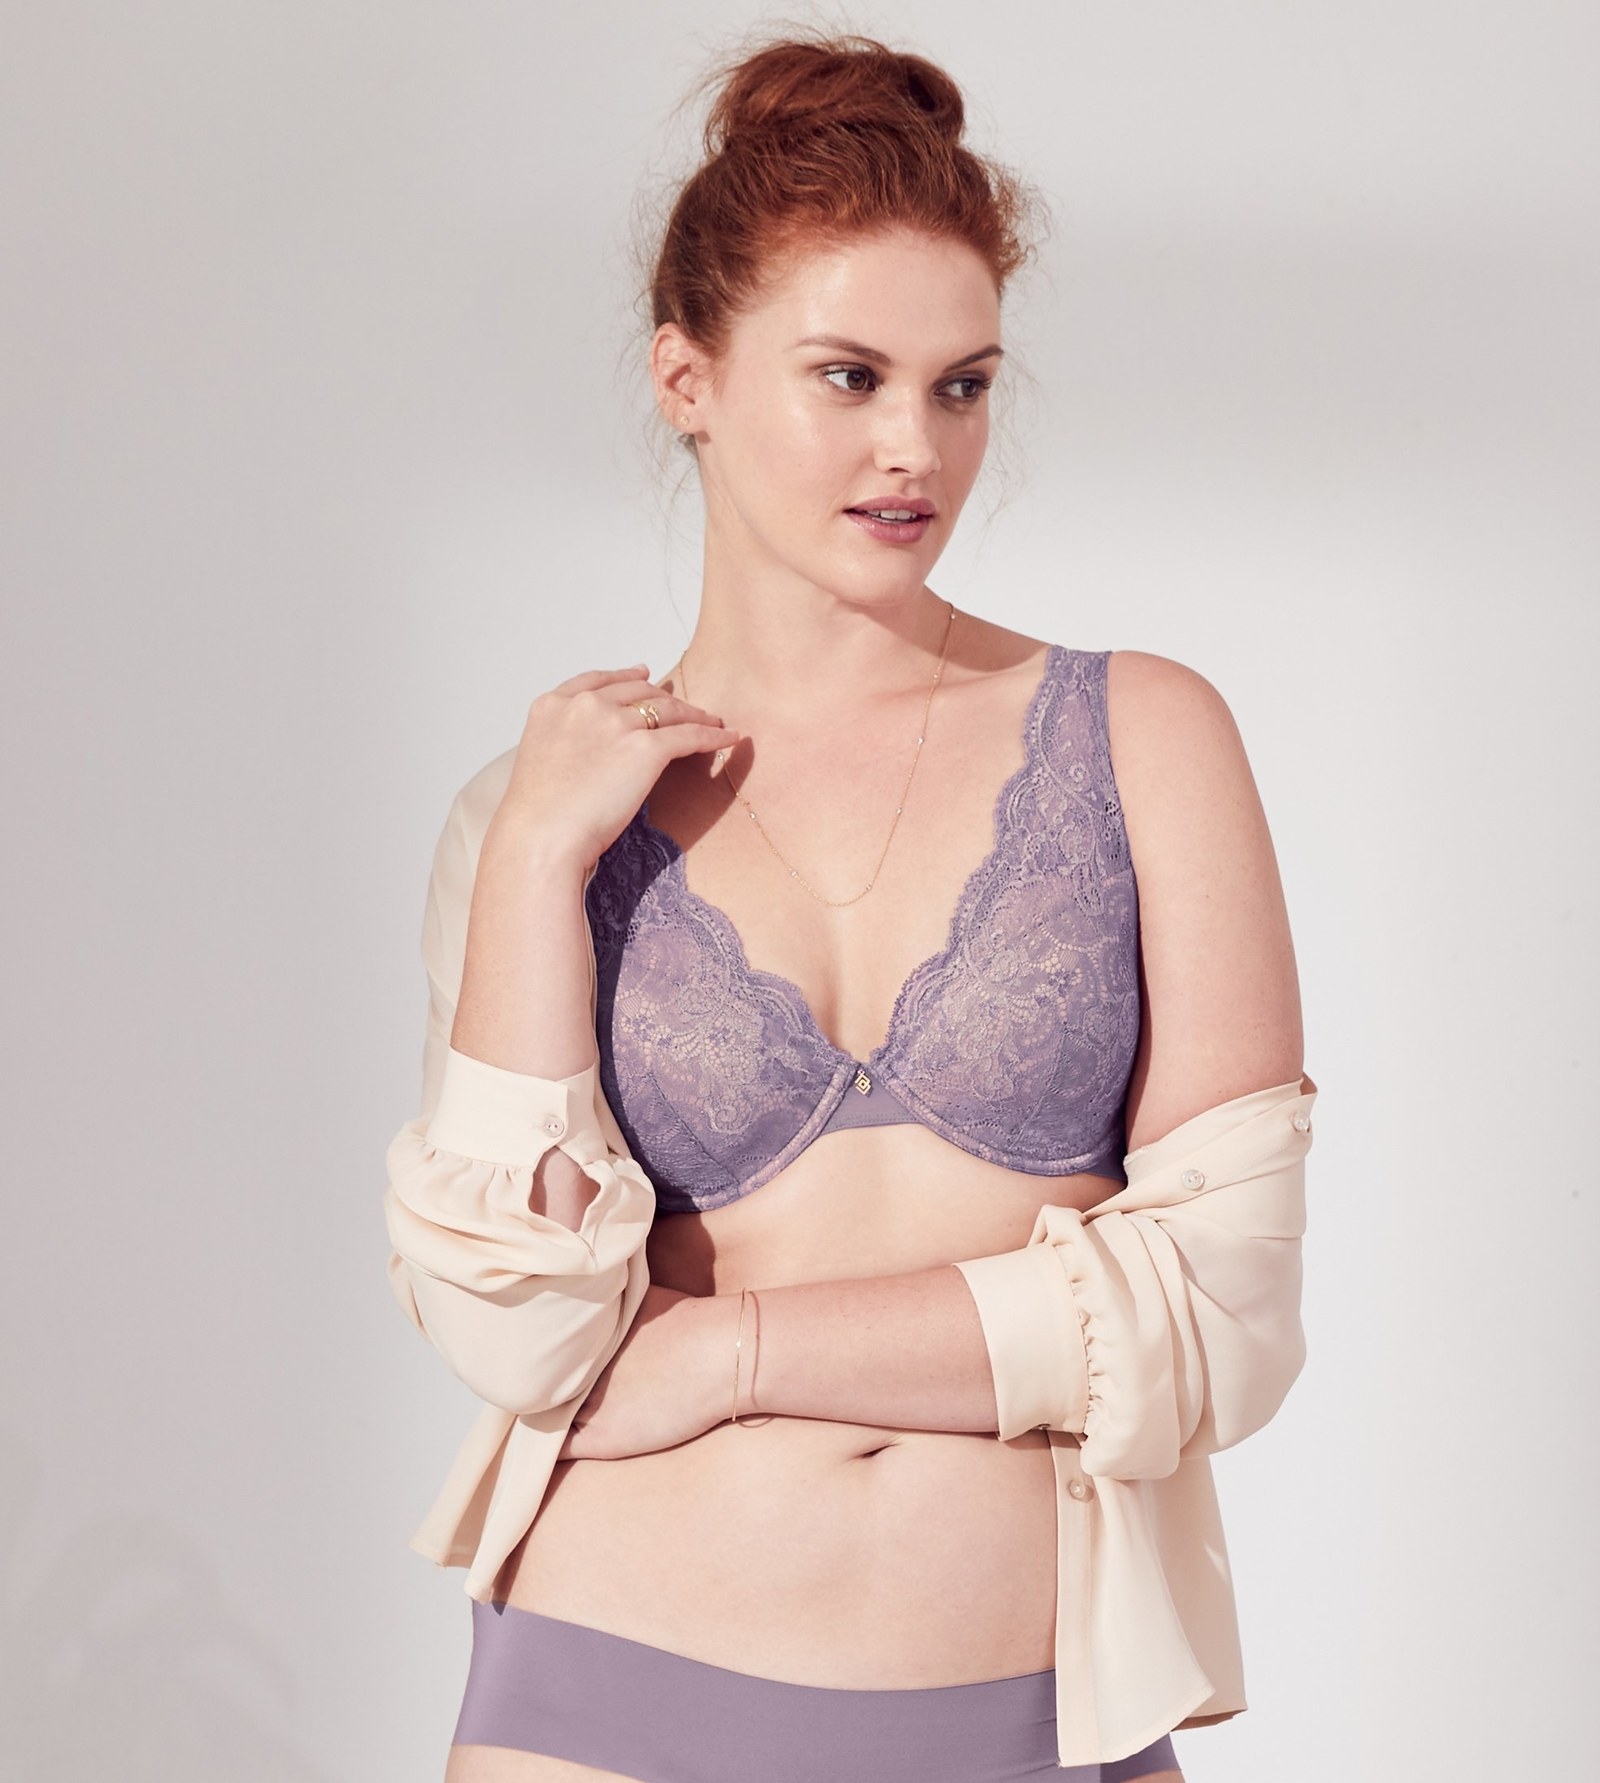 Booby Traps : Bra Shopping and expert tips on getting the right